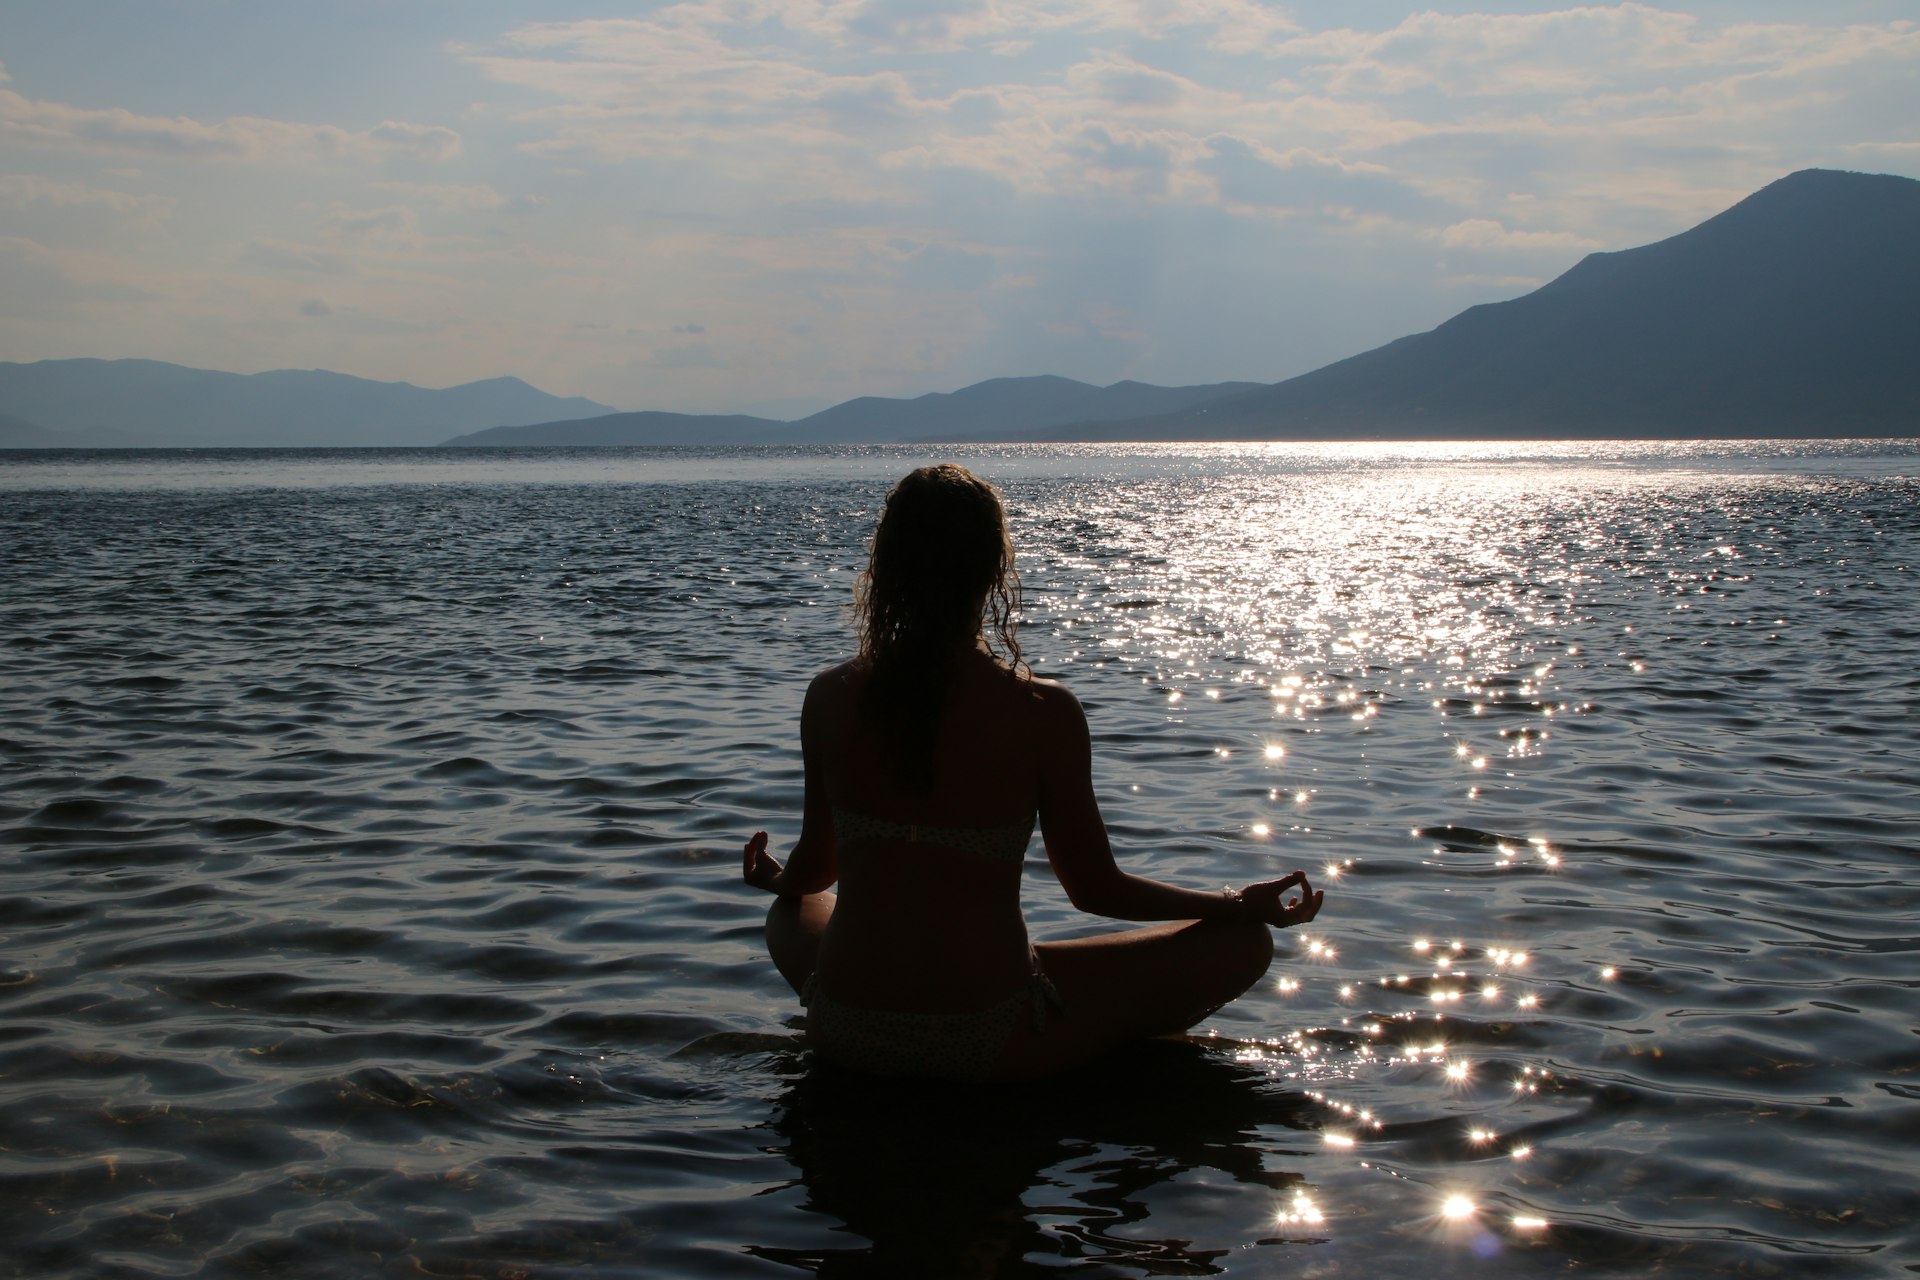 A silhouette of a person meditating in the lotus position by the sea at sunset, with mountains in the background and the water reflecting the sunlight